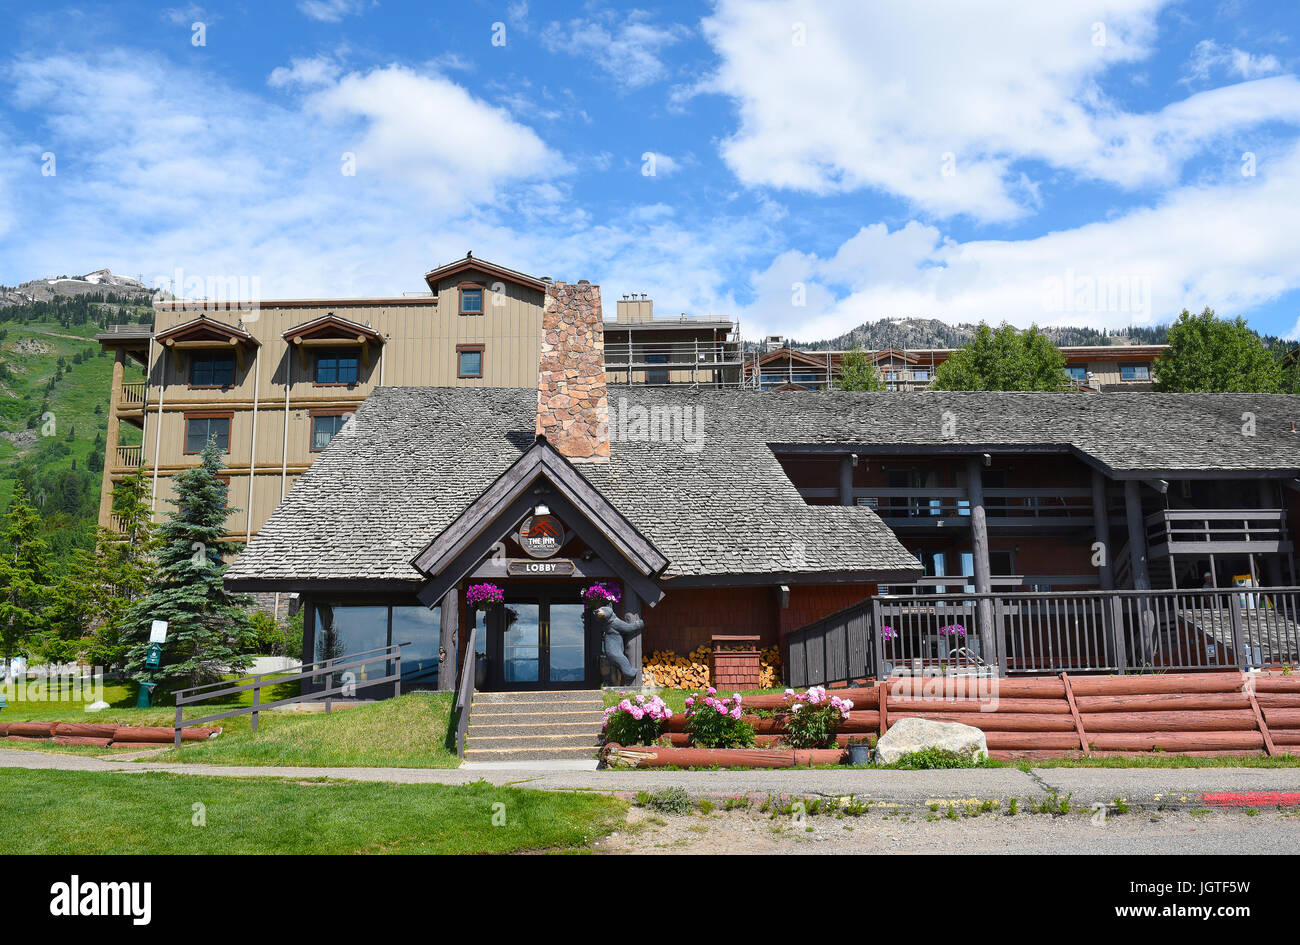 JACKSON HOLE, WYOMING - JUNE 27, 2017: The Inn at Jackson Hole. Ideally located at the base of Jackson Hole Mountain Resort with easy access to the mo Stock Photo